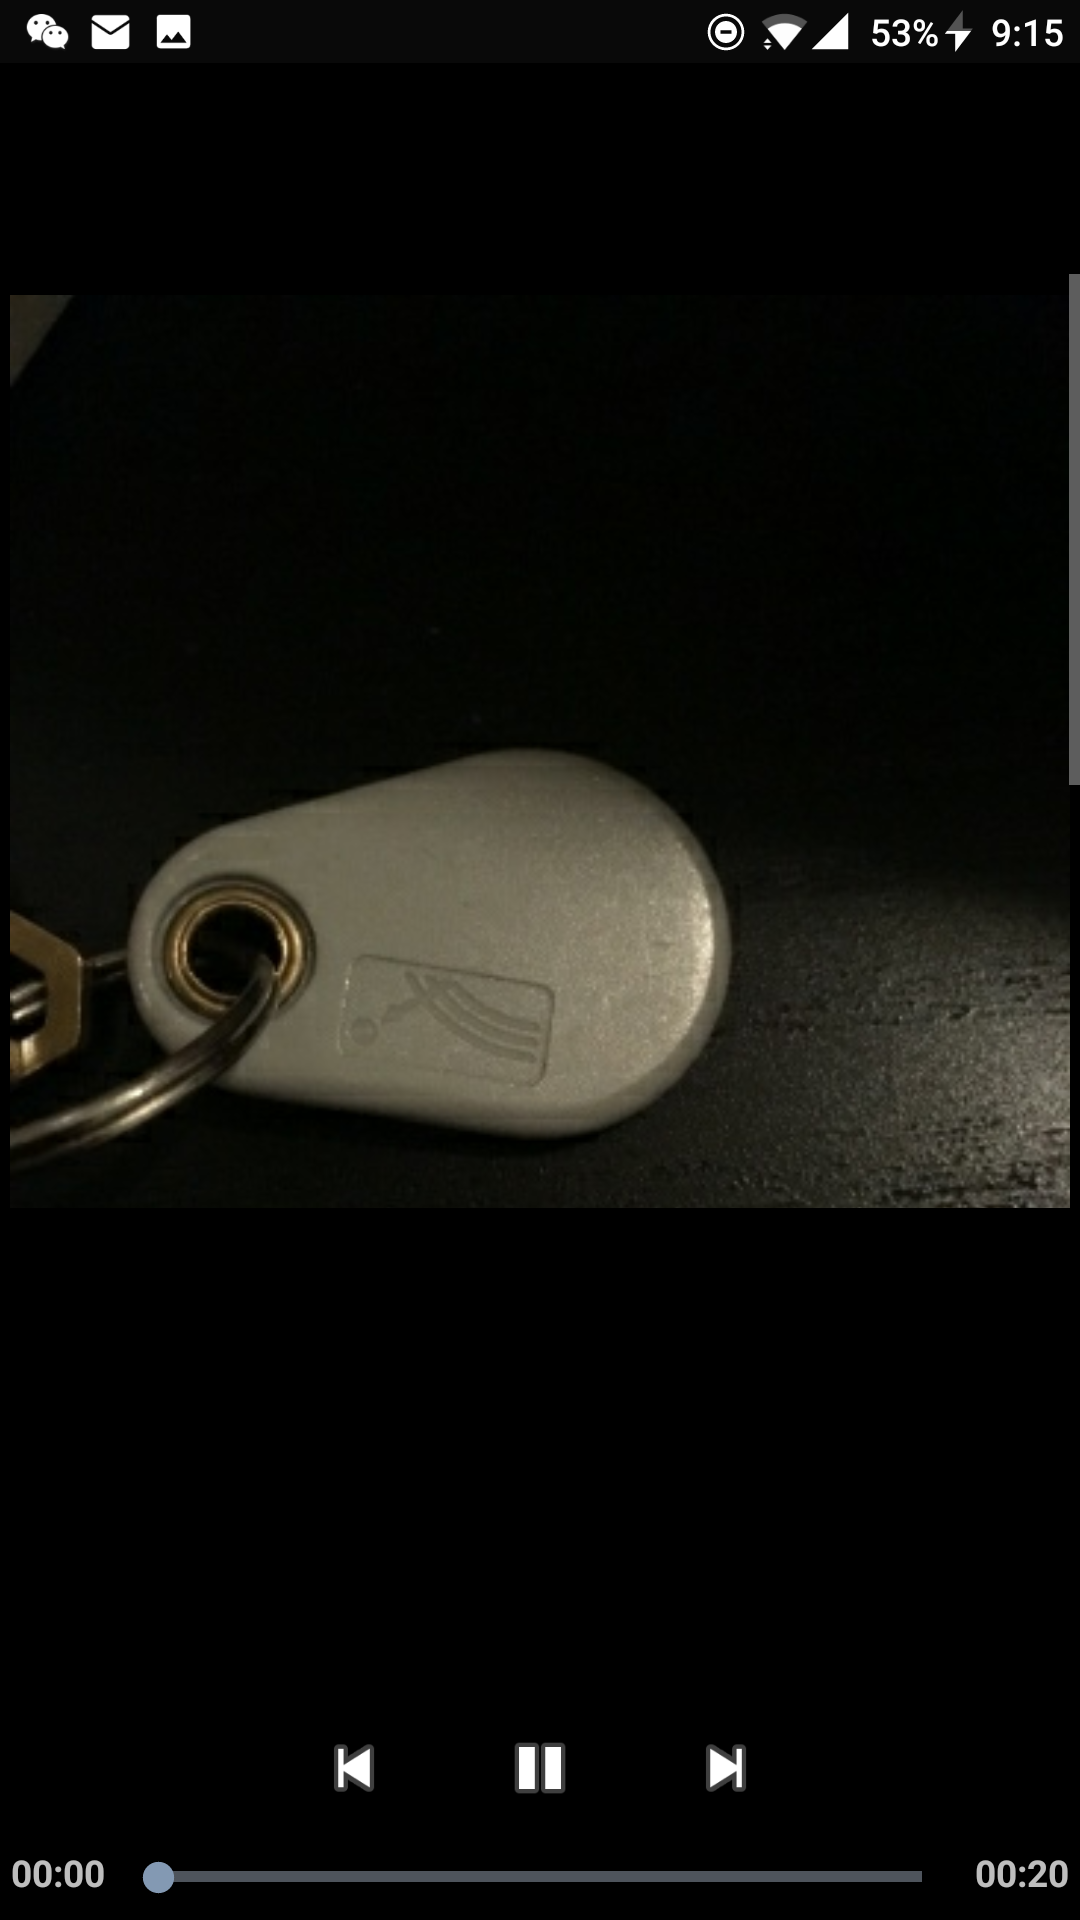 prox HID fob key copy clone service duplicate replace replacement copying 